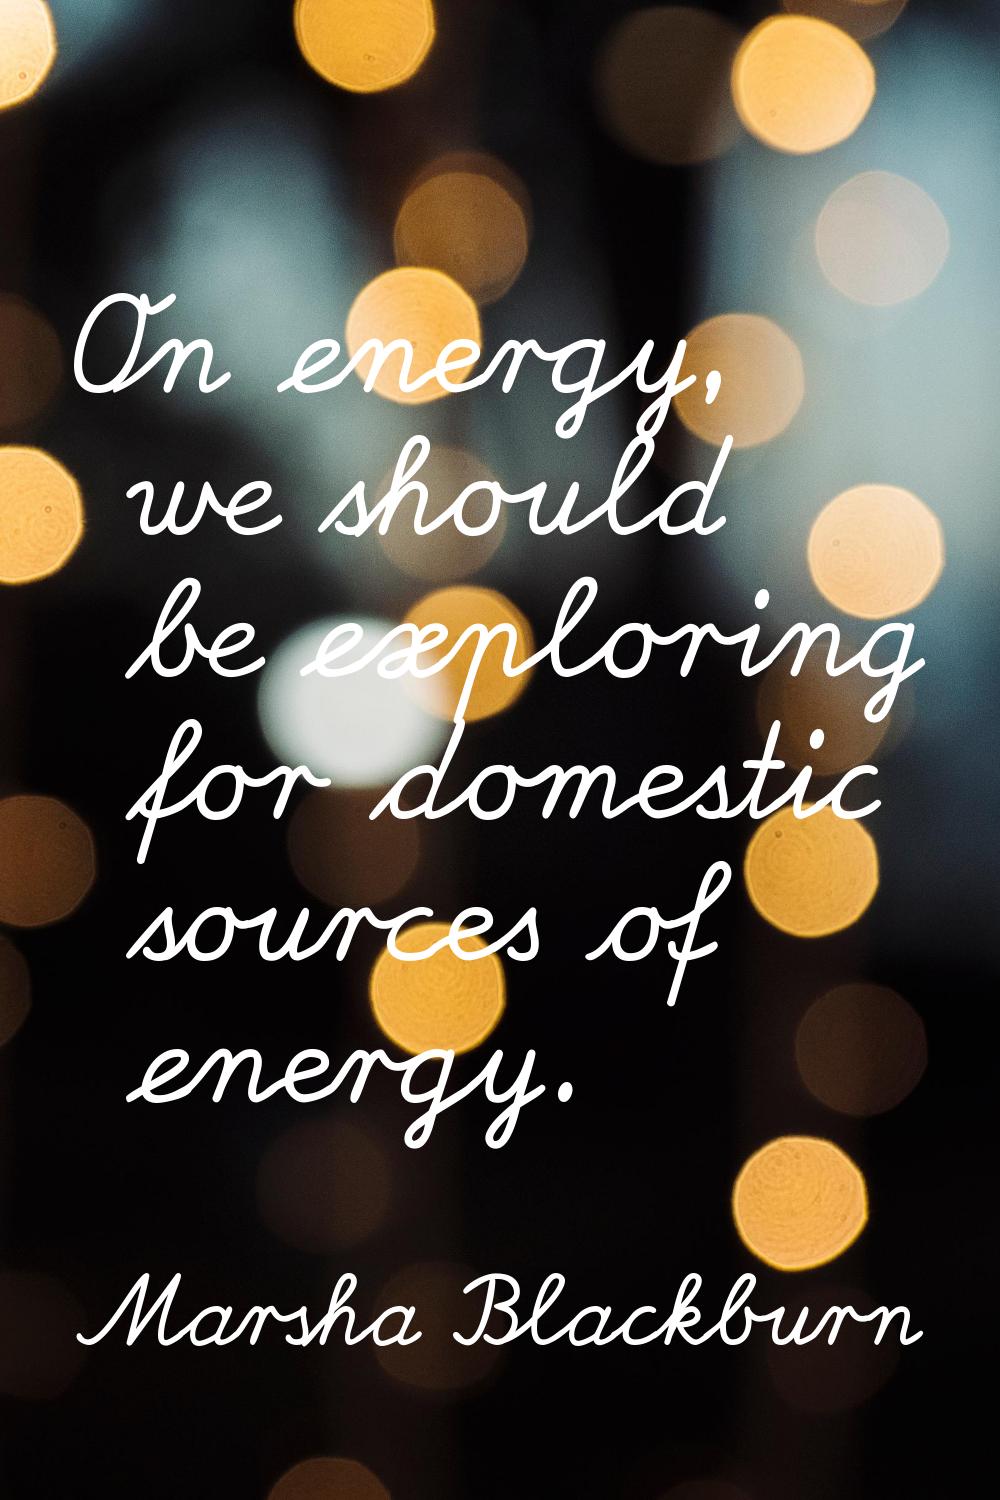 On energy, we should be exploring for domestic sources of energy.